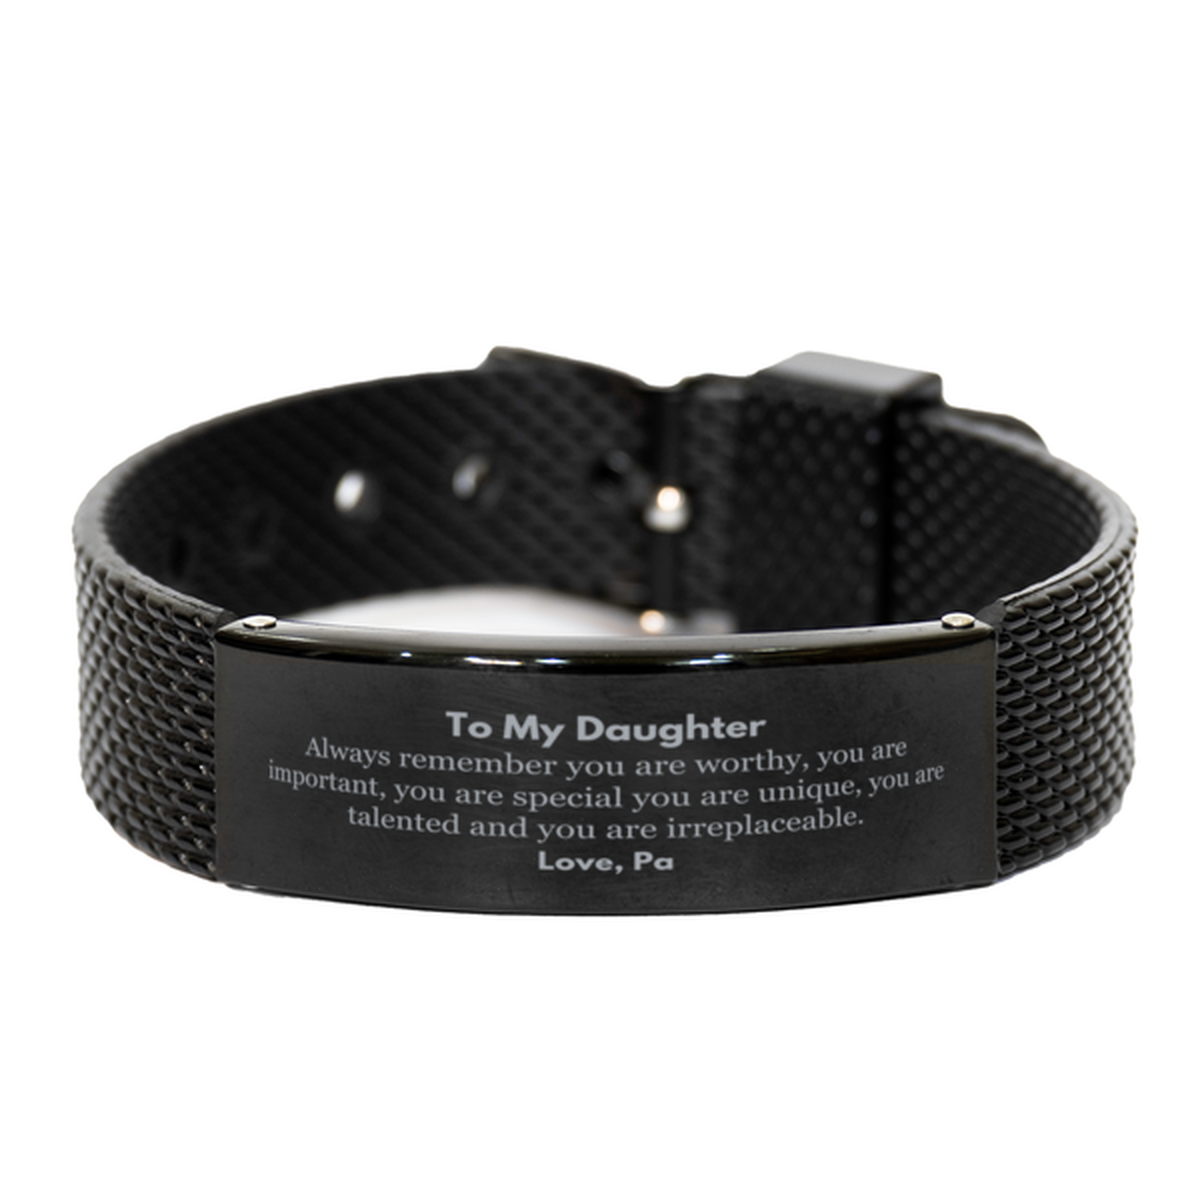 Daughter Birthday Gifts from Pa, Inspirational Black Shark Mesh Bracelet for Daughter Christmas Graduation Gifts for Daughter Always remember you are worthy, you are important. Love, Pa